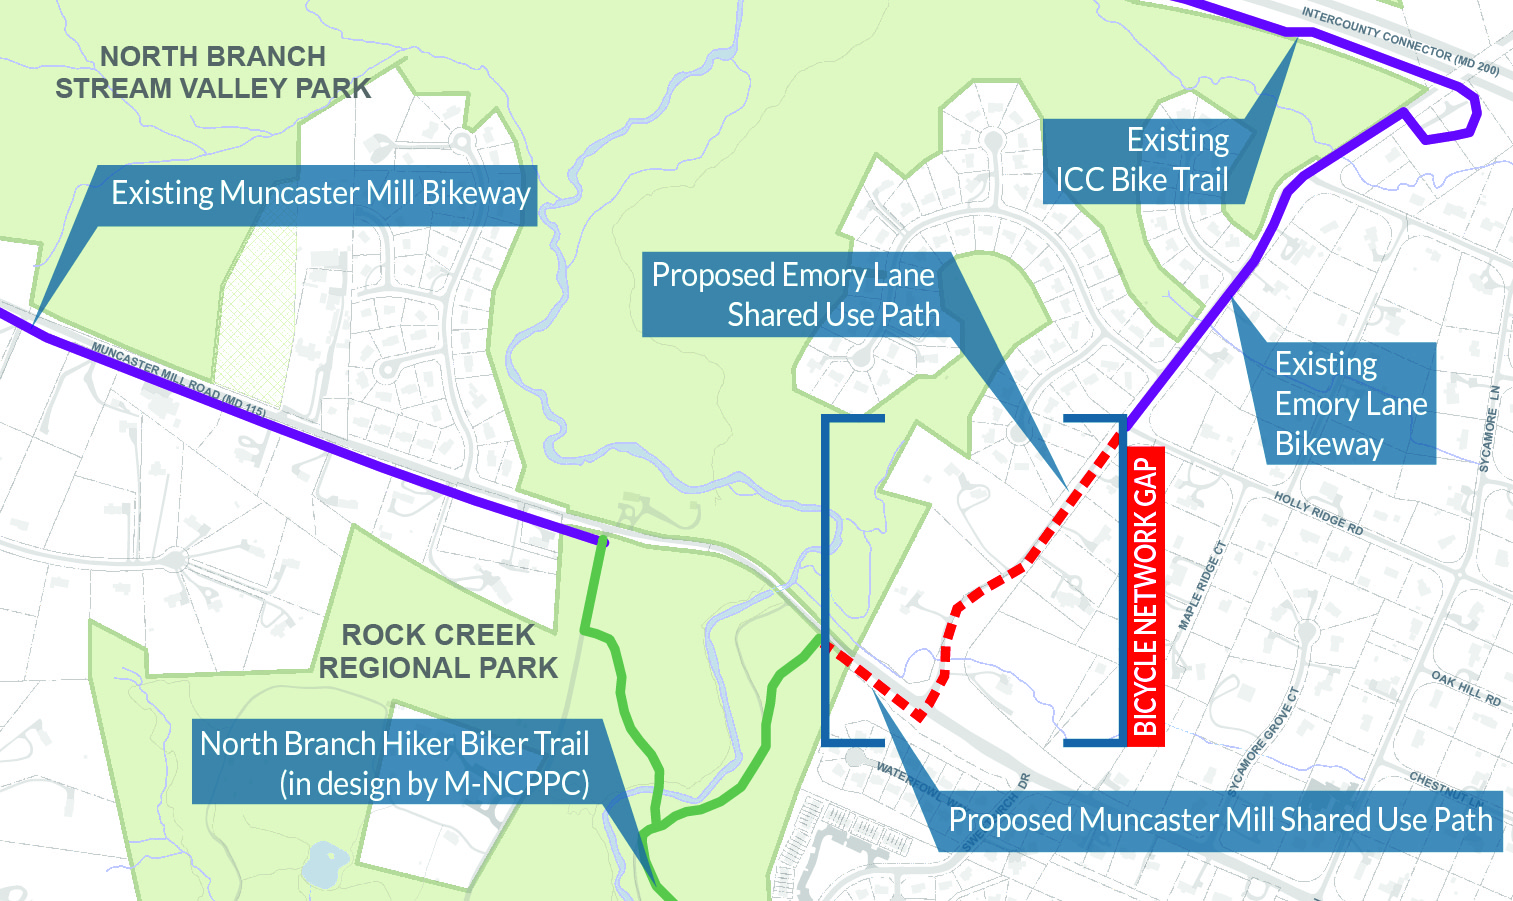 Emory Lane & Muncaster Mill Road Shared Use Path